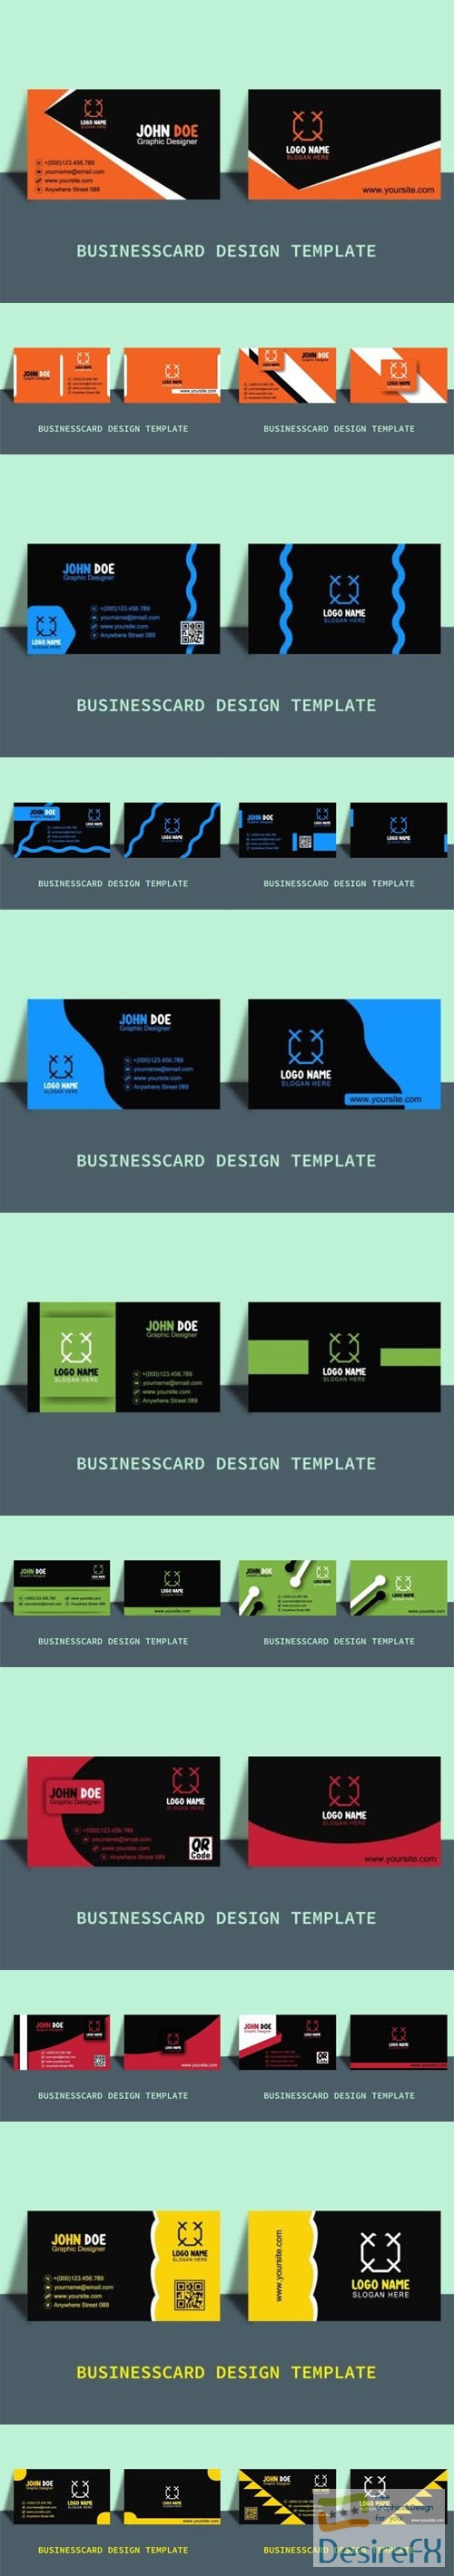 16 Business Cards Vector Designs Templates